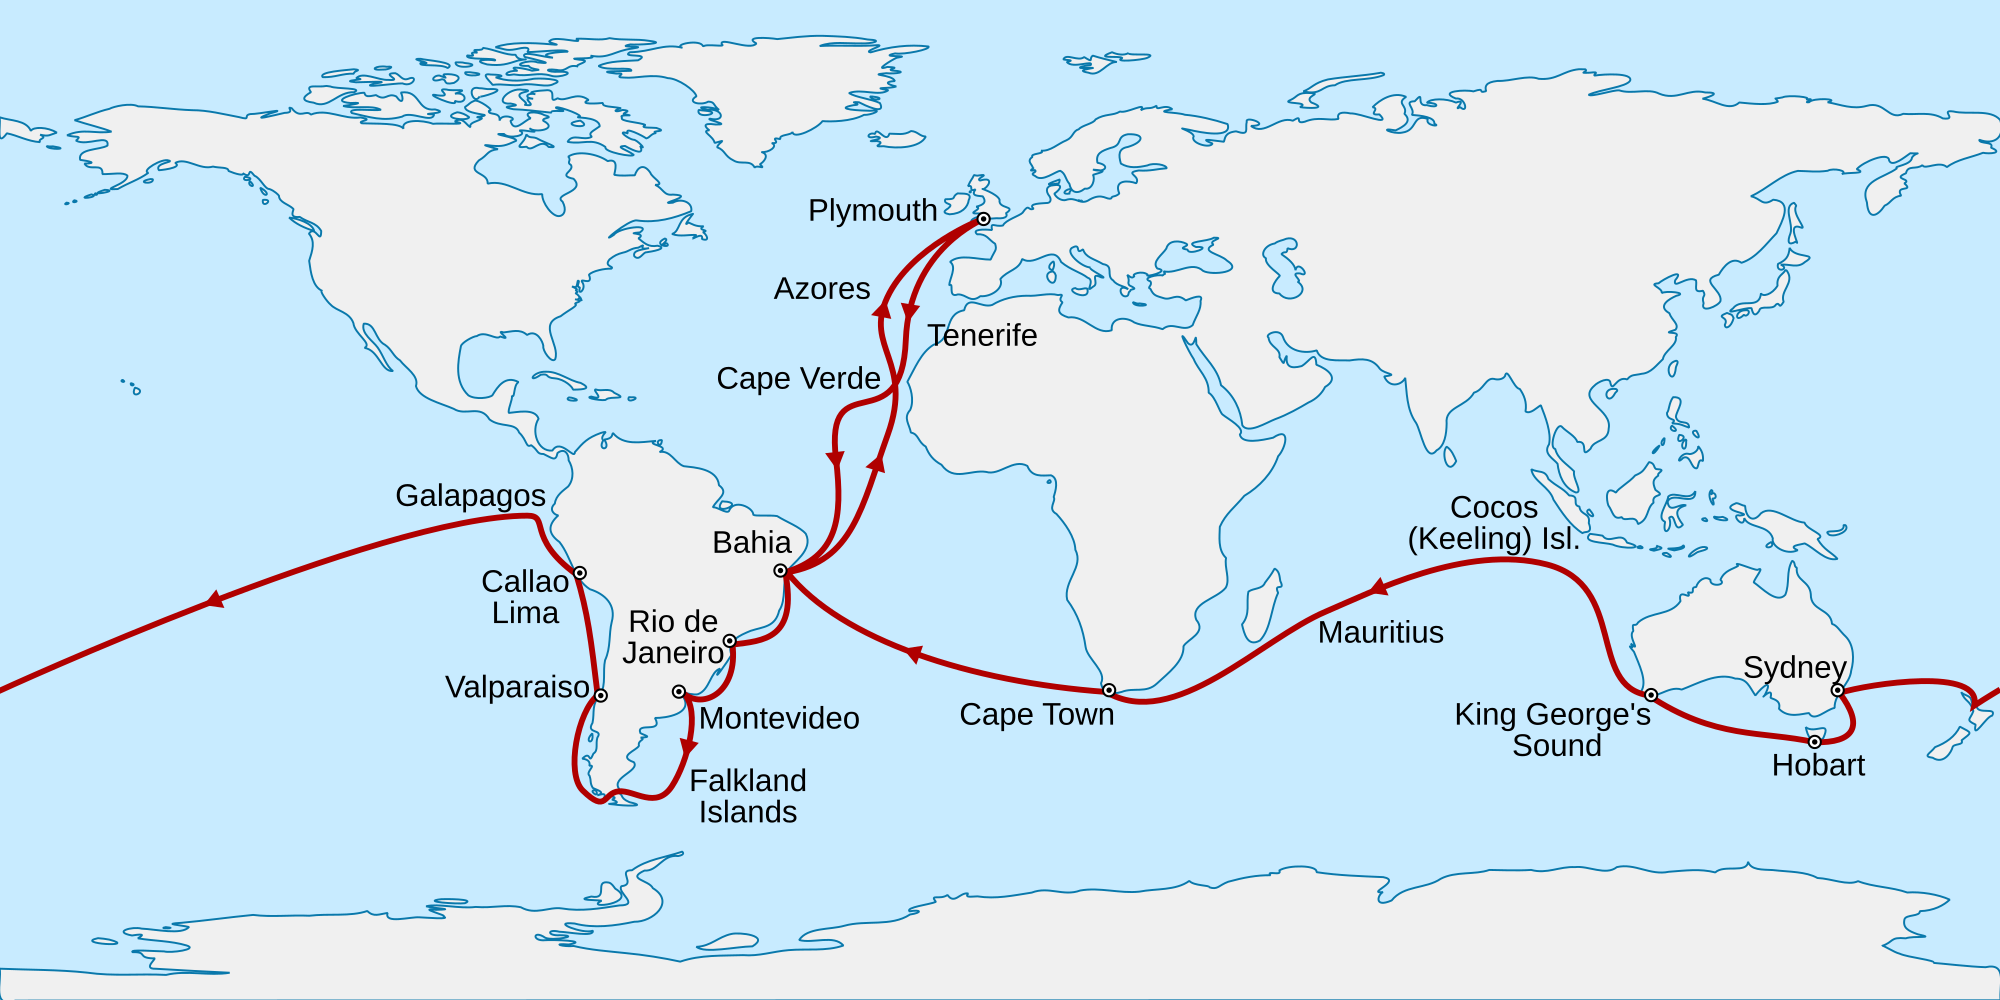 The voyage of the Beagle, 1831–1836